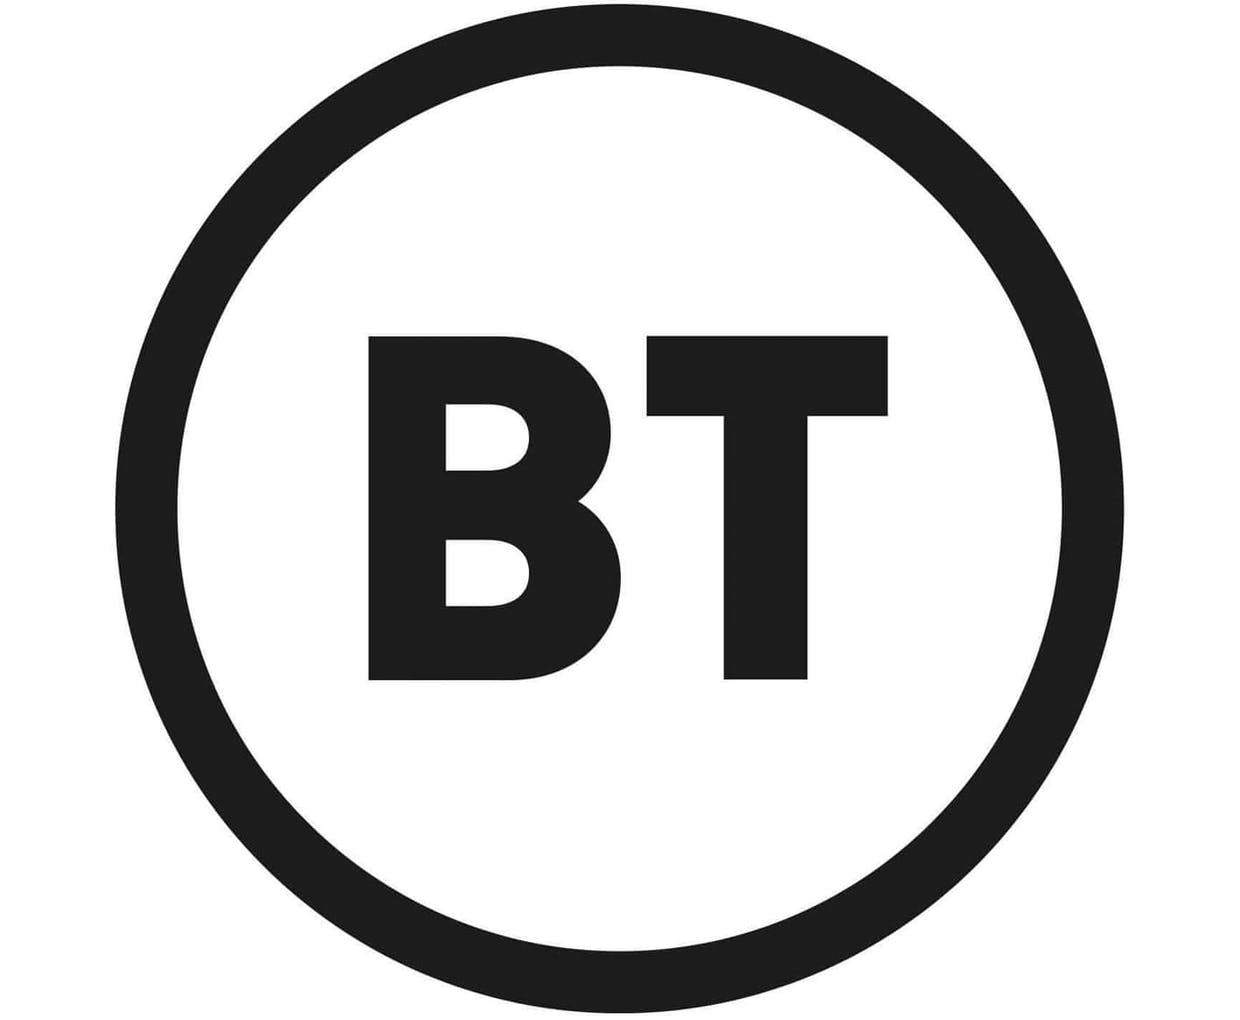 If less really is more, did BT get its new logo right?